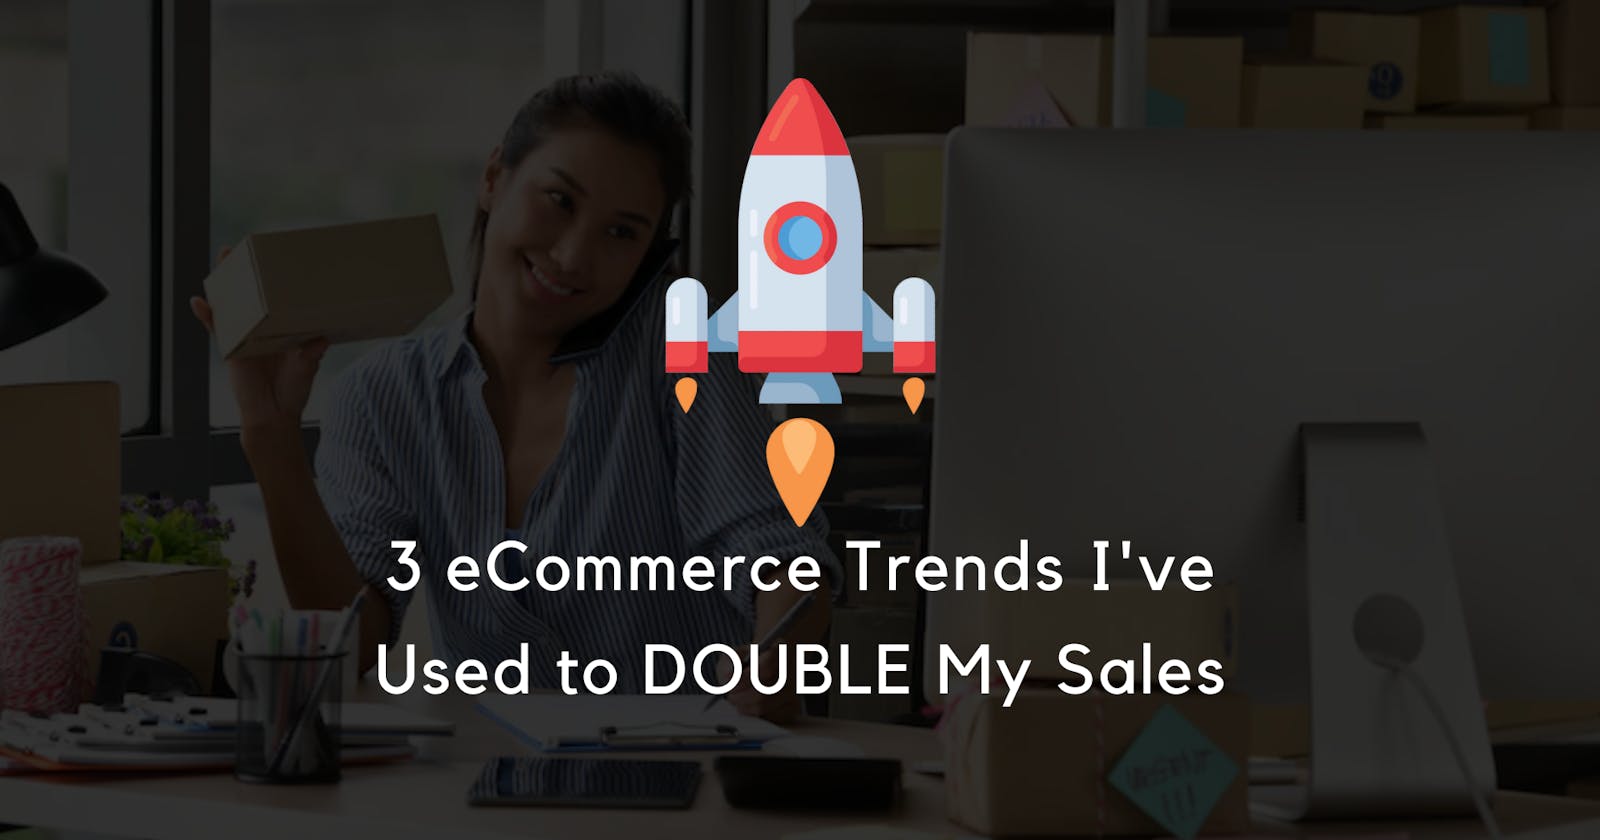 3 eCommerce Trends I’ve Used to Double My Sales 🏇